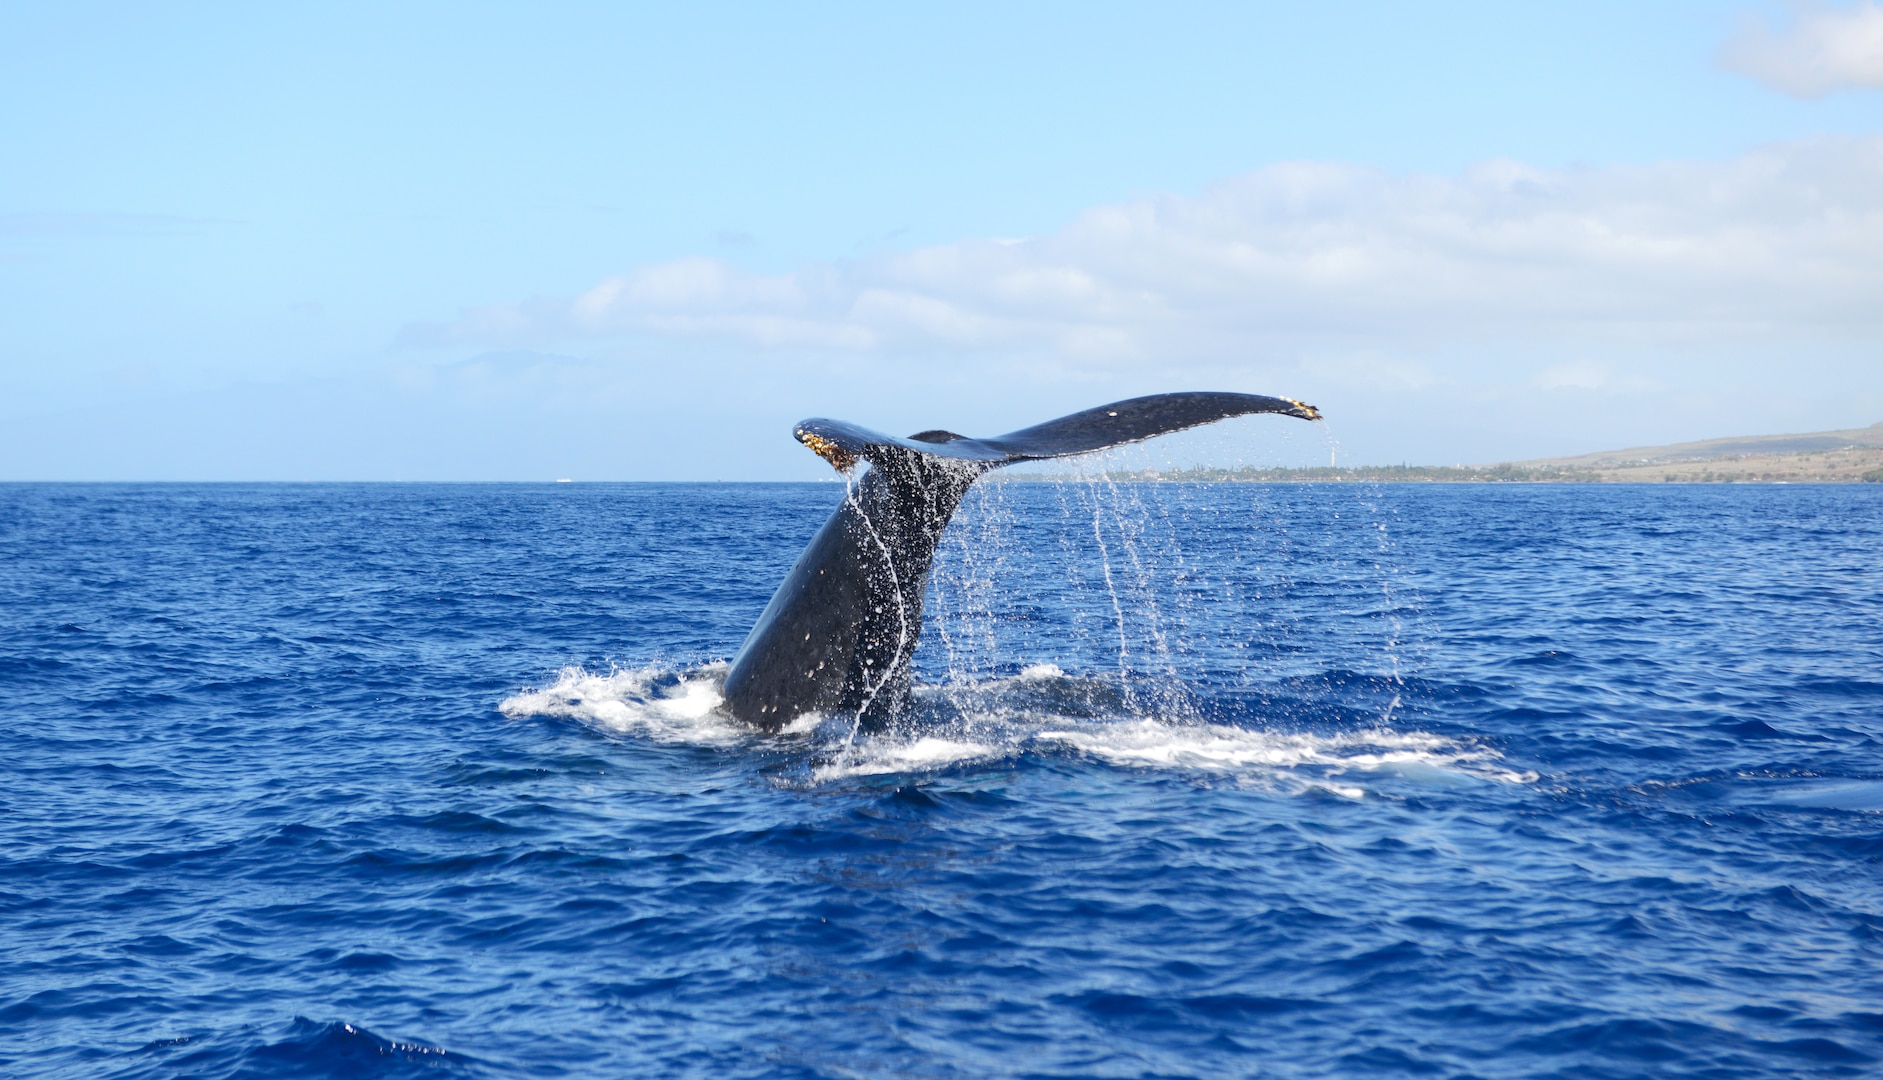 A humpback whale shows its tail as it dives below the surface of the water in Maui, Hawaii, Feb. 14, 2020. The humpback whale is the world’s fifth largest whale and can grow between 40 and 50 feet in length. (U.S. Coast Guard photo by Petty Officer 3rd Class Benjamin Berkow/Released)